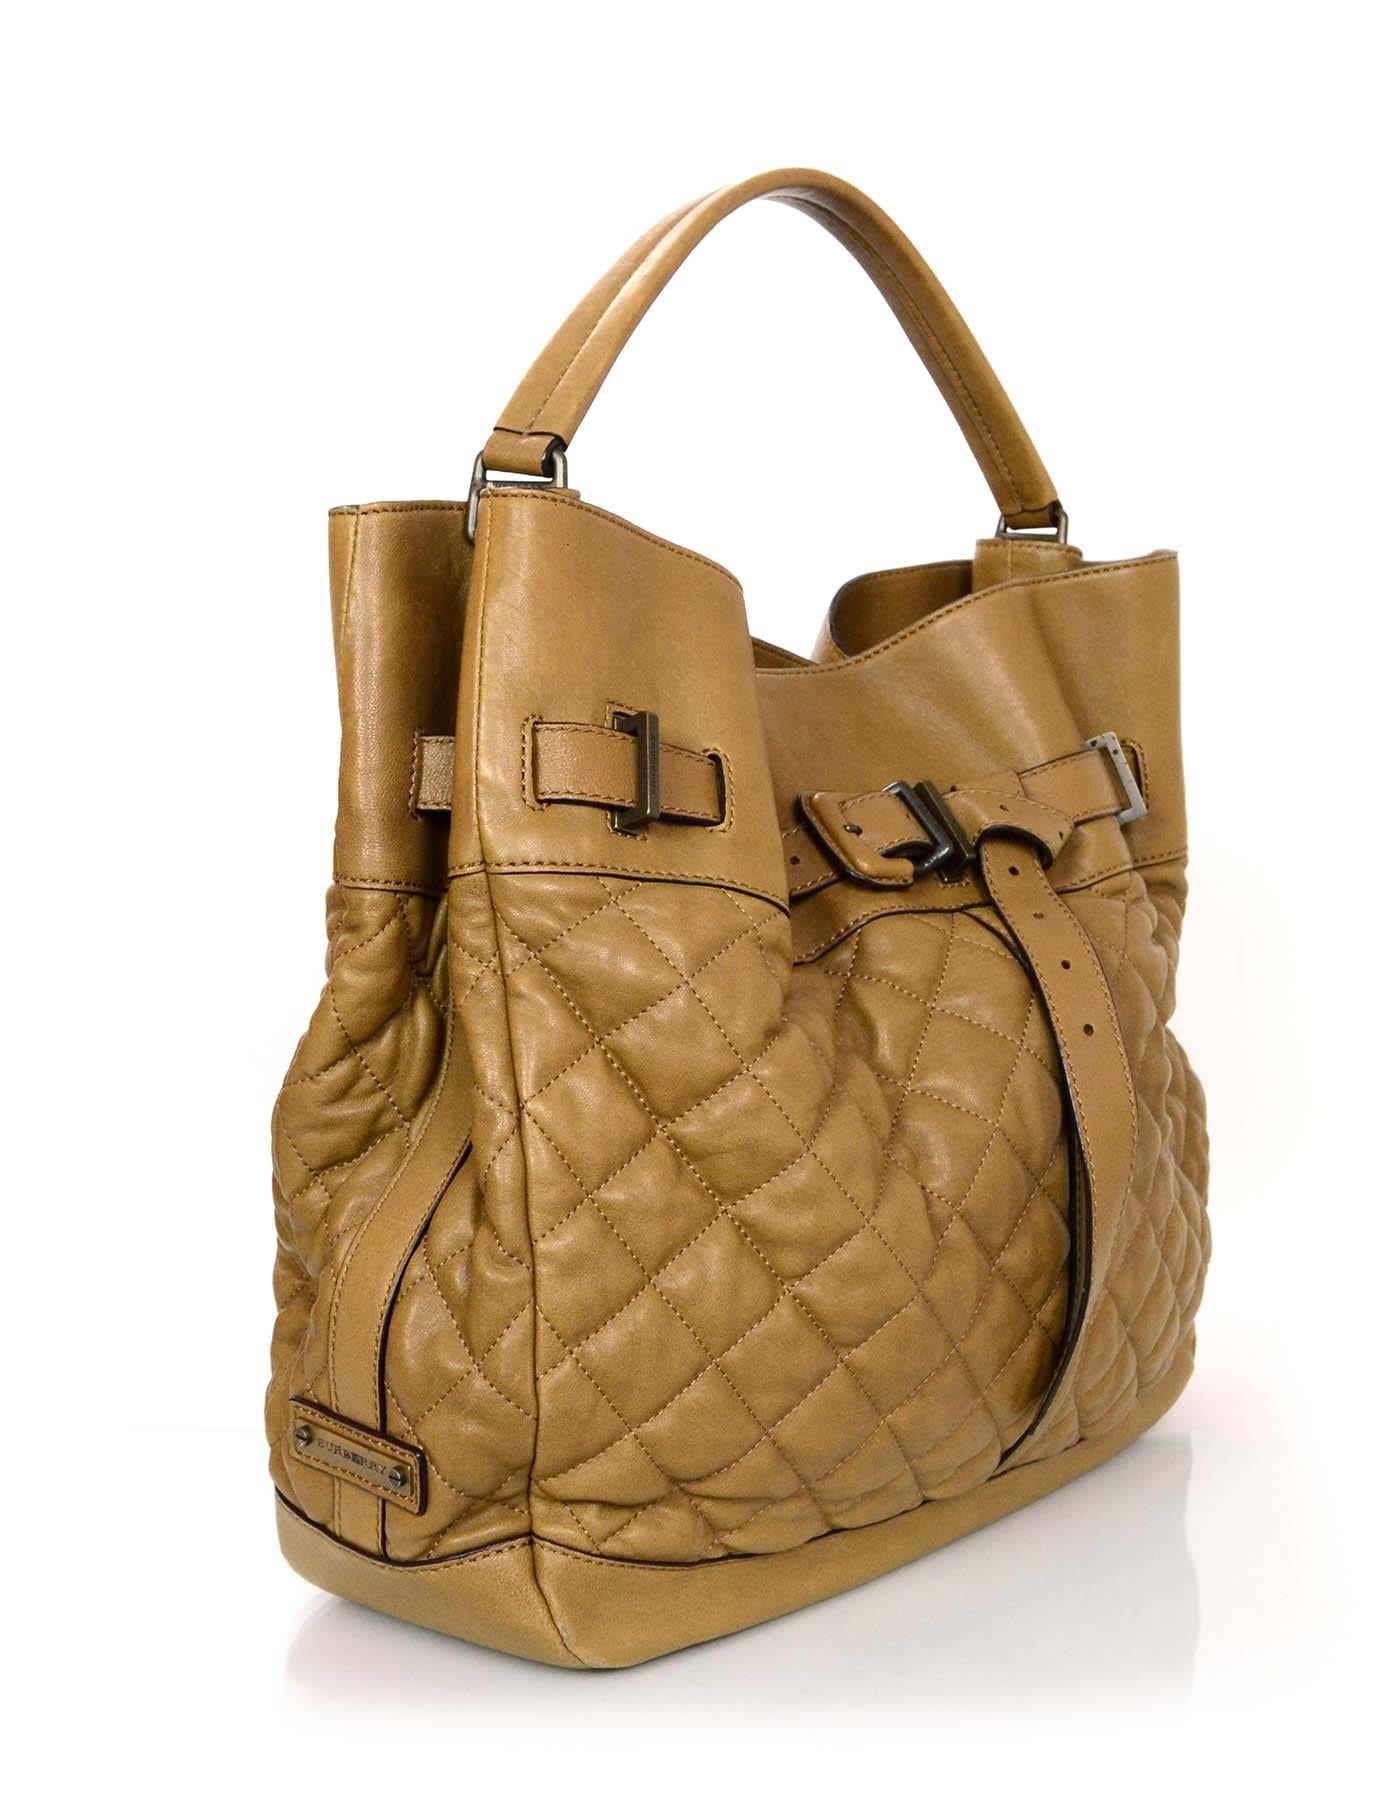 burberry quilted handbag